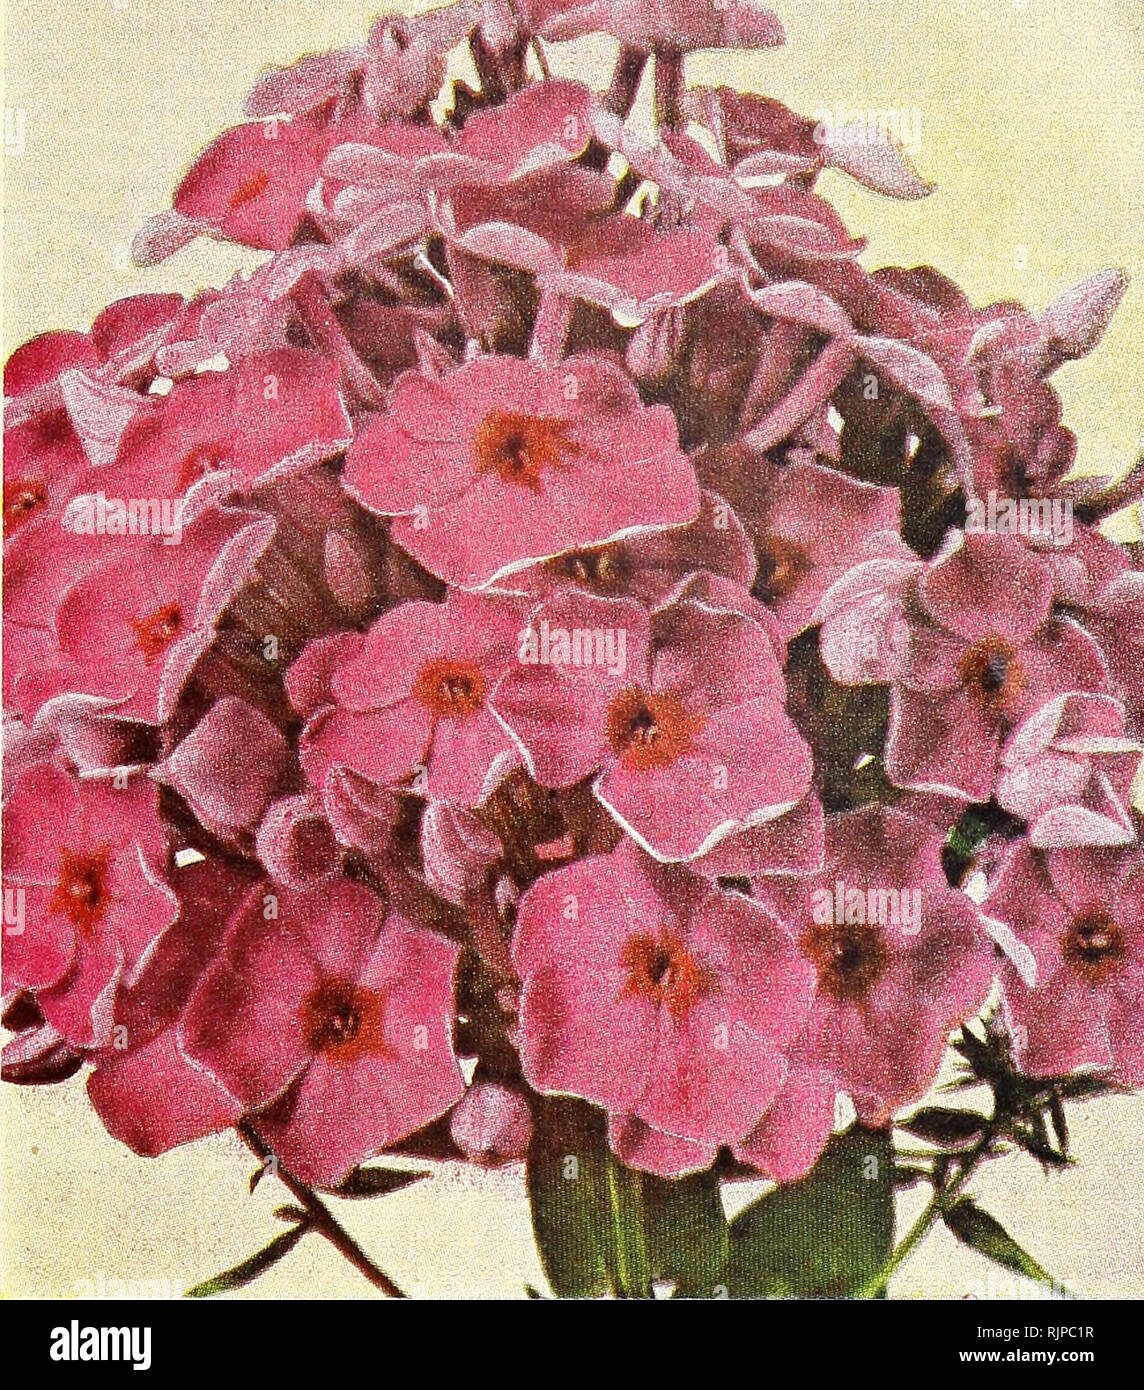 . Autumn bulbs and plants for spring beauty : 1949. Gardening Equipment and supplies Catalogs; Seeds Catalogs; Bulbs (Plants) Catalogs; Flowers Seeds Catalogs; Fruit Seeds Catalogs. Chesapeake Phlcx HARDY PHLOX Wonderful improvements have been made in the Phlox Decussata in recent years. They are of the easiest culture, and during the late summer and fall months make the garden bright with their wealth of bloom and enchanting fragrance. A QUINTET OF AMERICA'S FINEST NEW PHLOX Brilliant Carmine-Crimson FLASH Gorgeous large Carmine-Crimson flowers with orange-scarlet centers. They are produced f Stock Photo